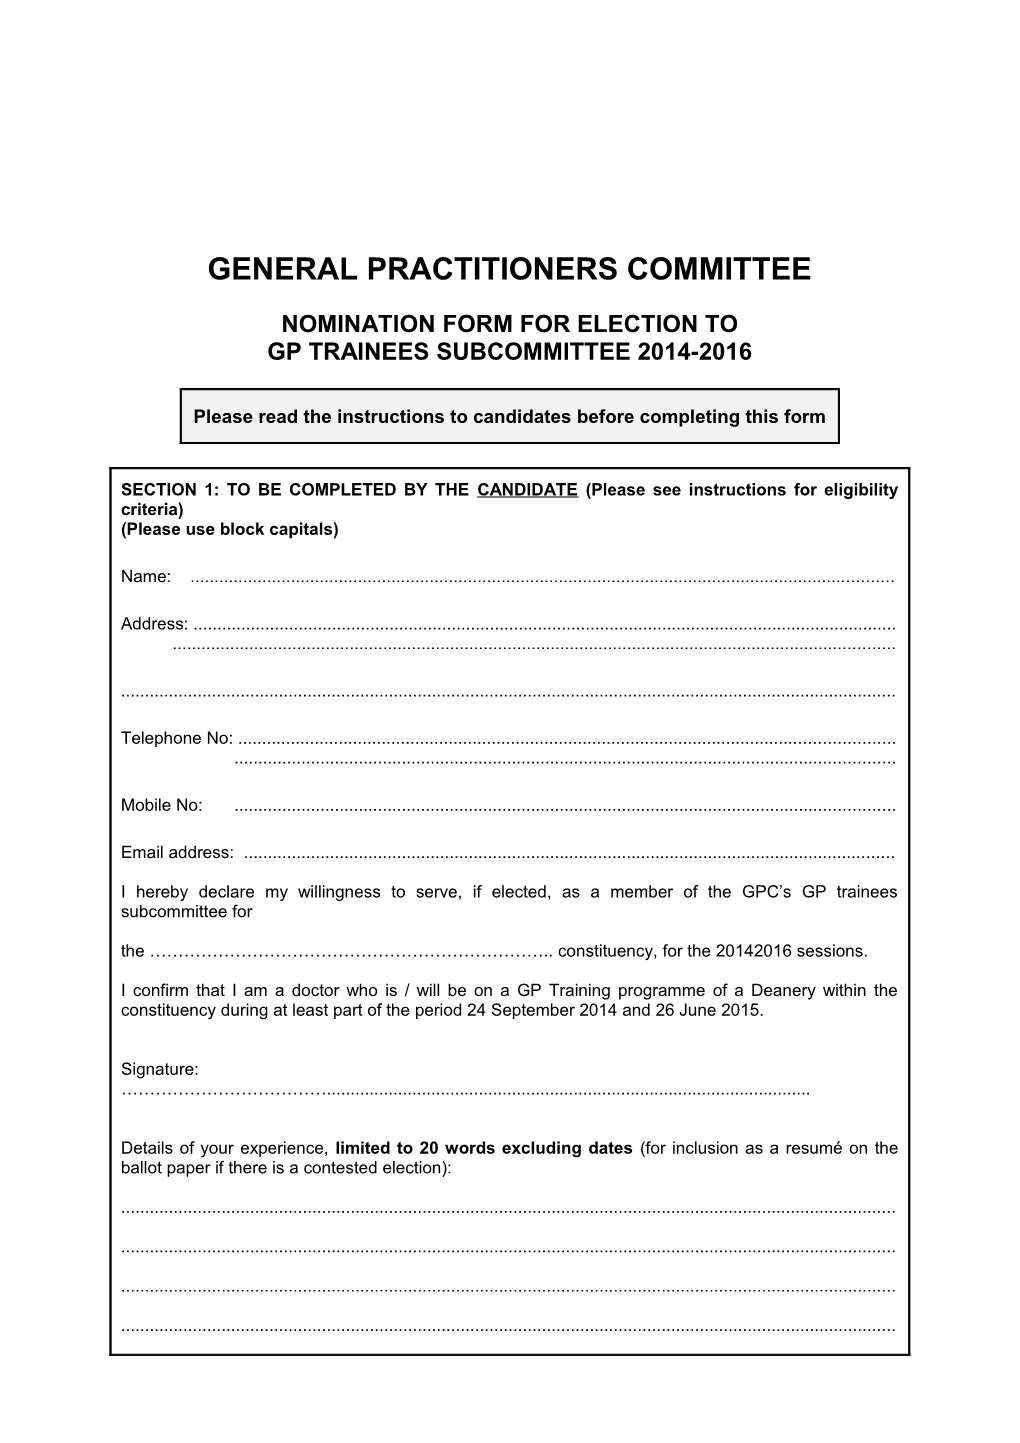 Nomination Form for Election To